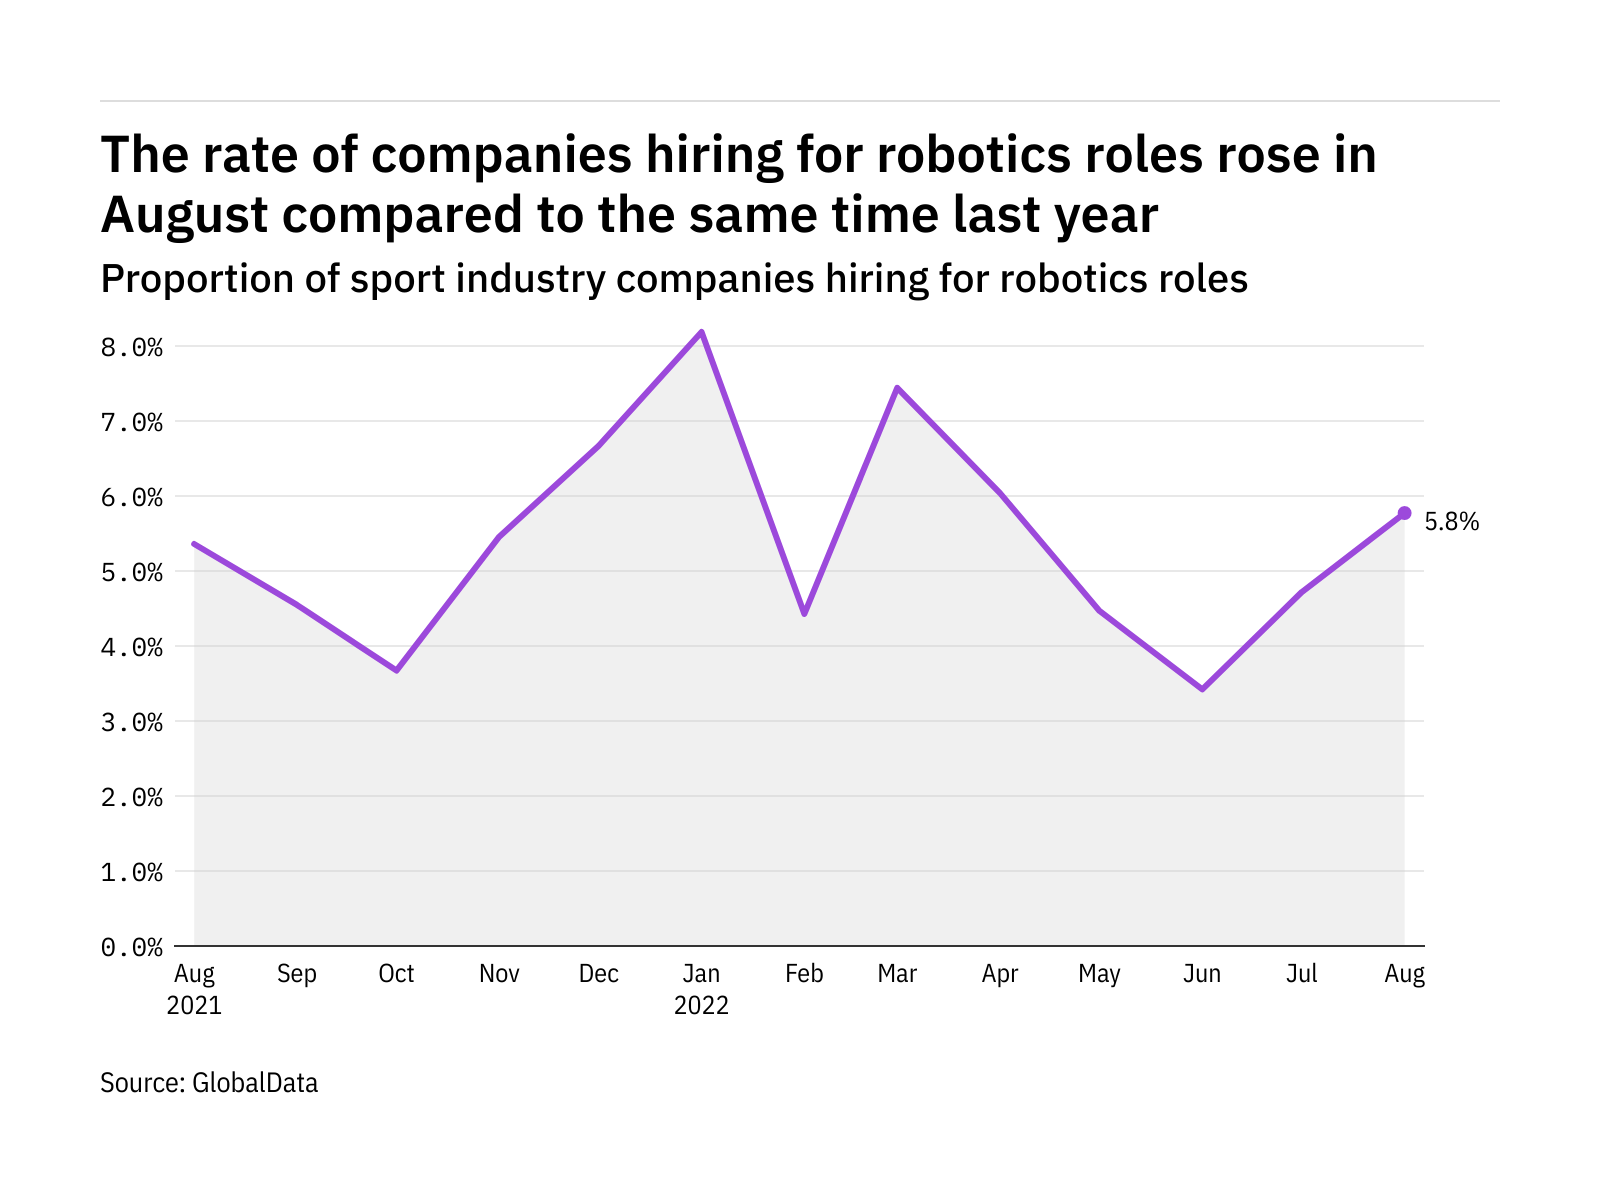 Robotics hiring levels in the sport industry rose in August 2022